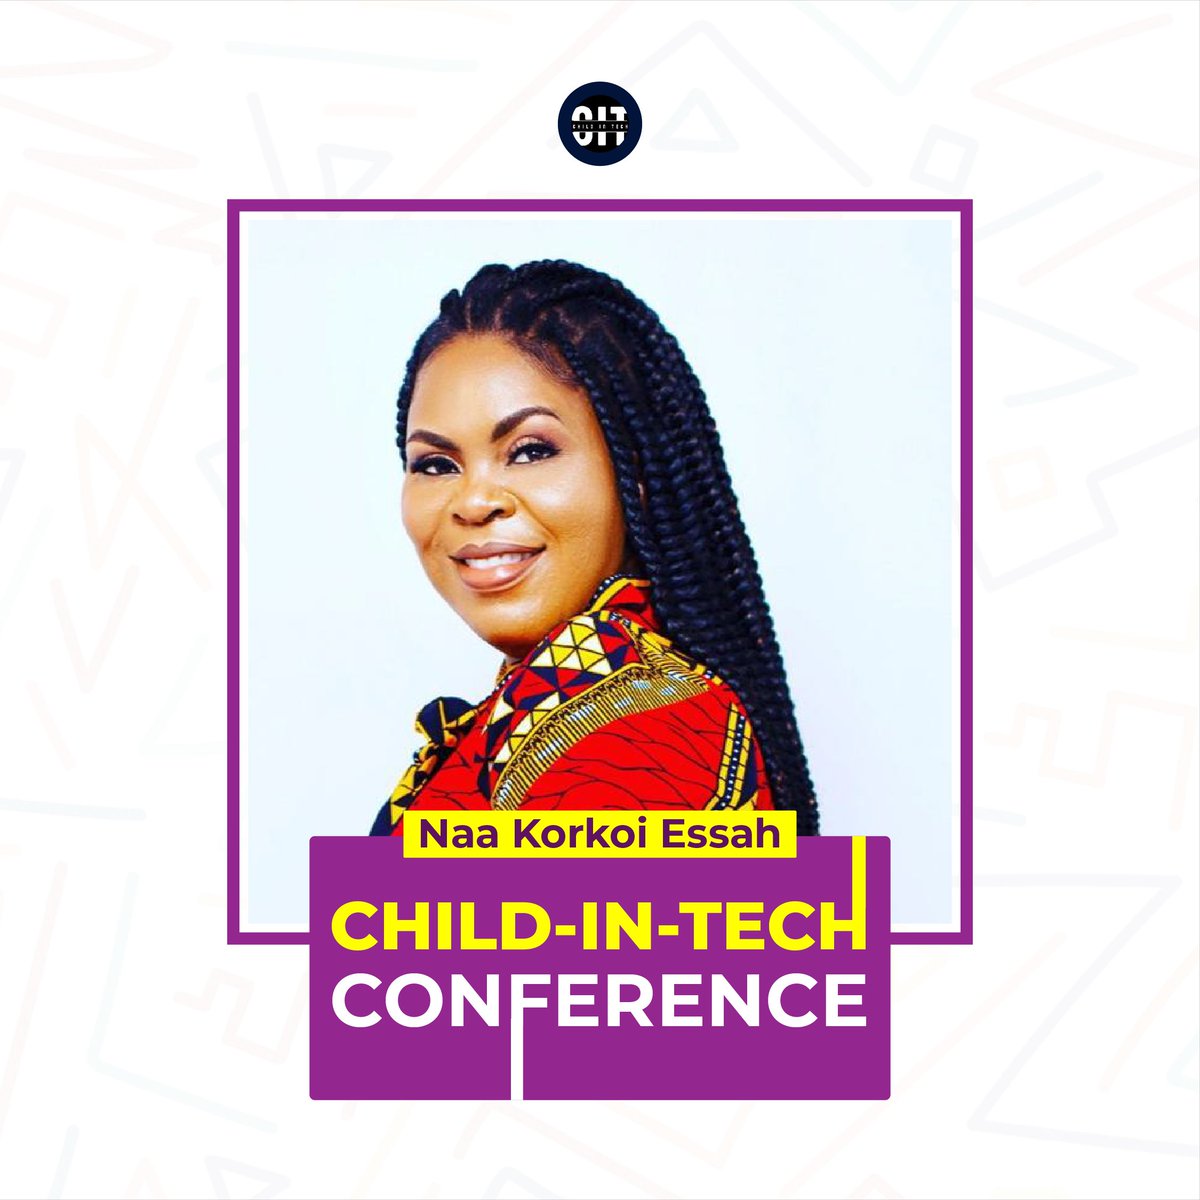 02. A Design to showcase the speaker and MCs of an upcoming tech event at @acitygh 
@ChildInTech
Software Used 
Adobe Illustrator